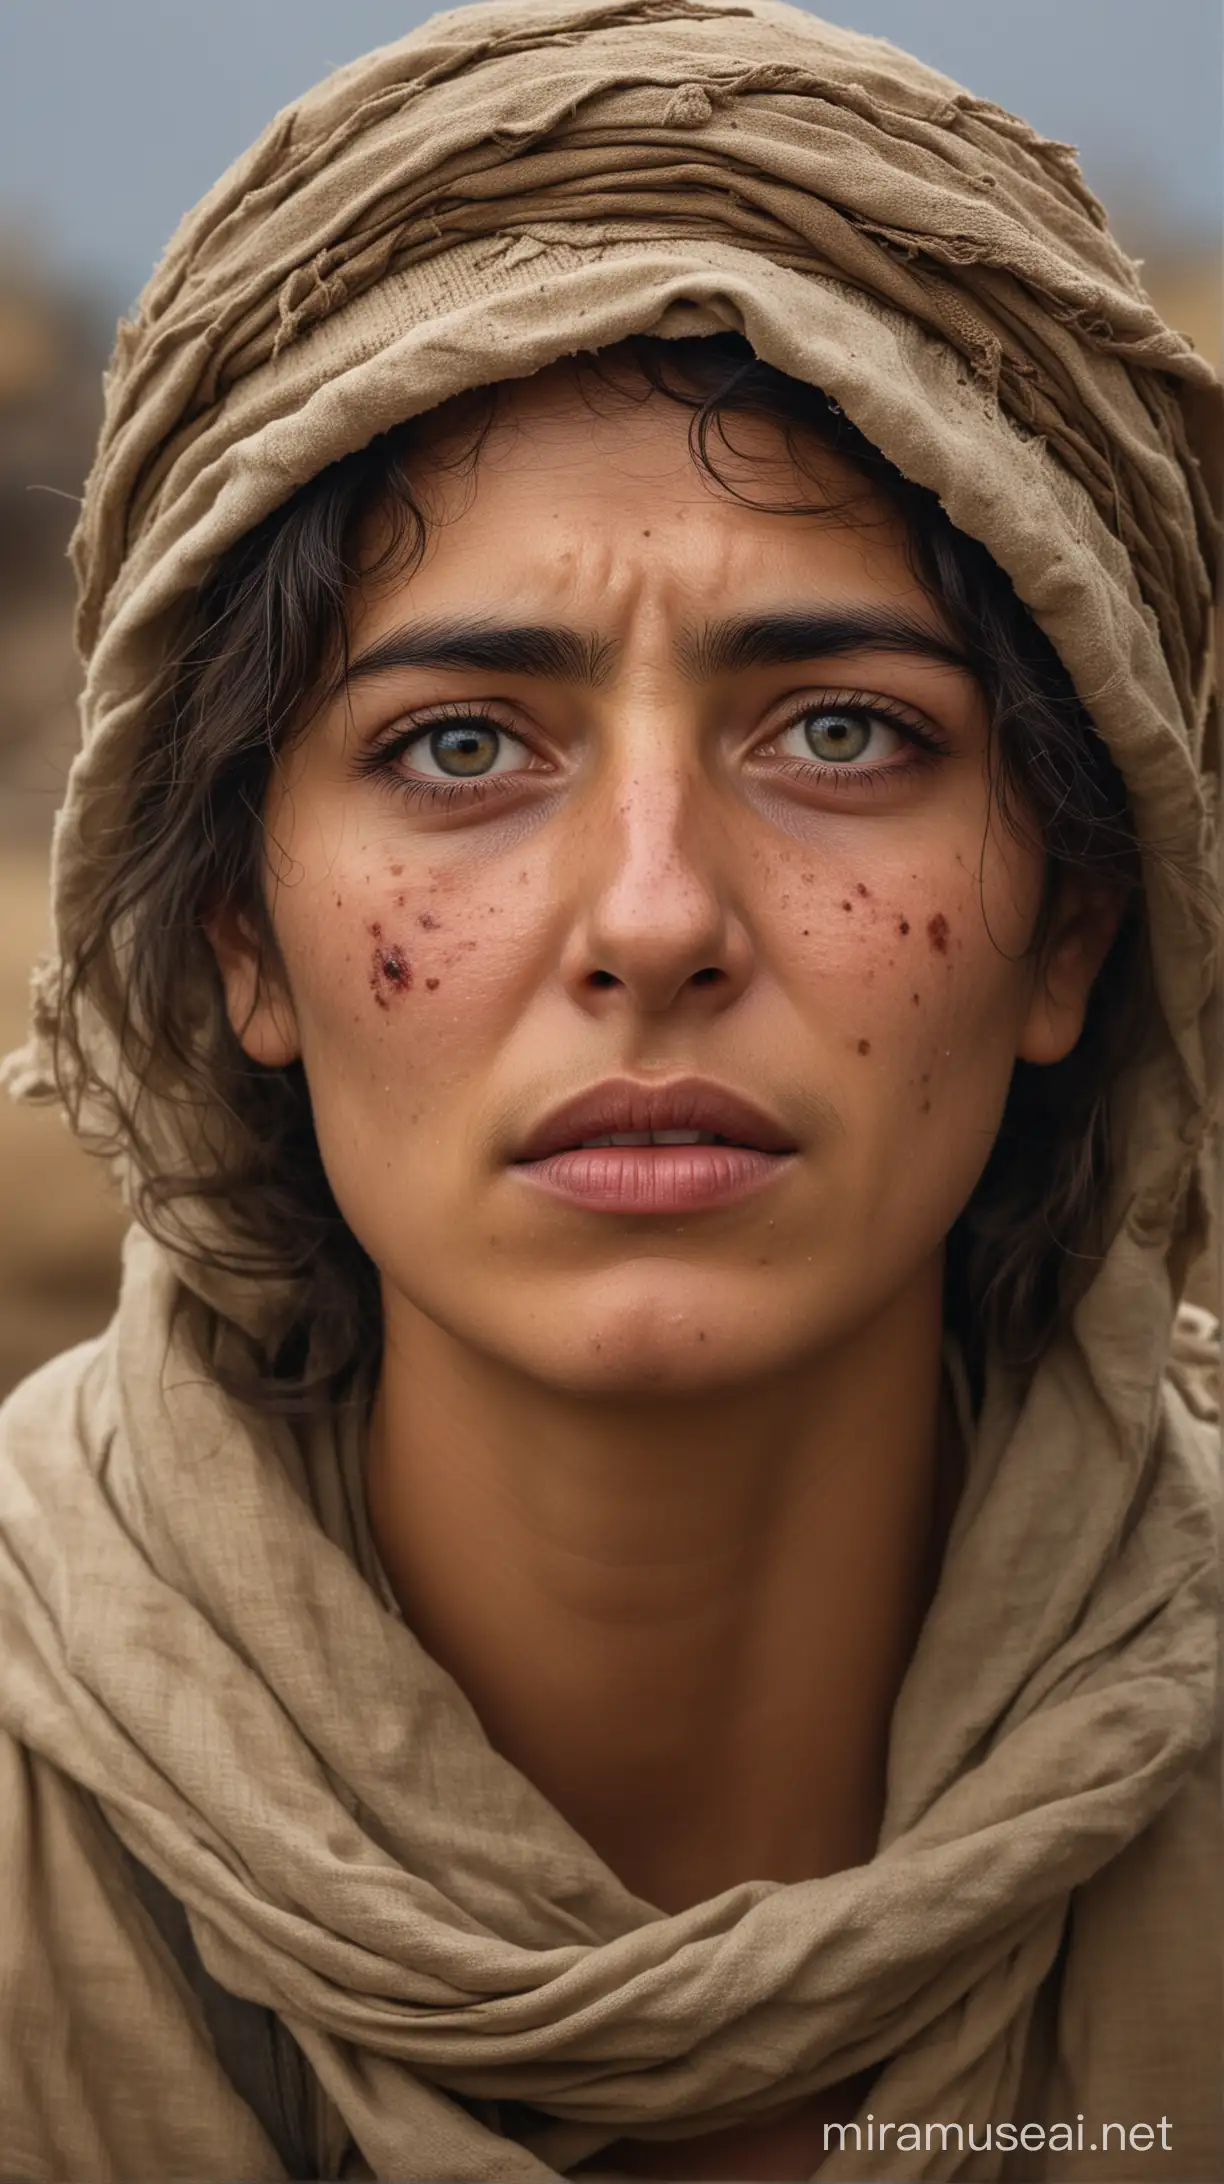 During the Battle of Gallipoli, Nezahat Onbaşı is portrayed fighting fiercely amidst the chaos of the trenches, her eyes reflecting the courage she displays despite her tender age.

